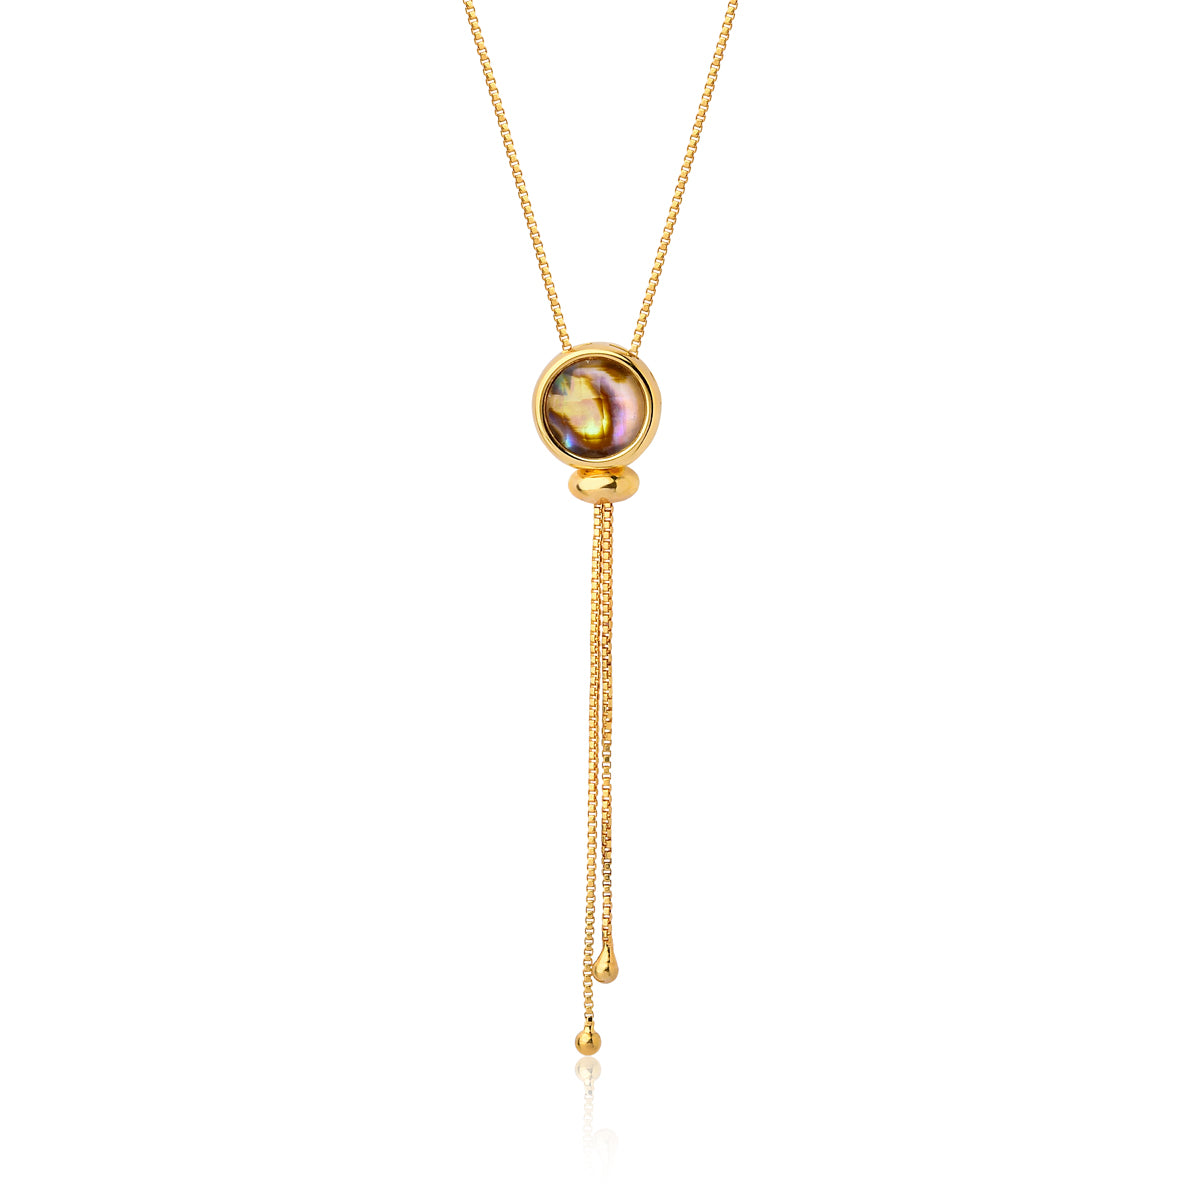 Adjustable Lariat Slider Necklace in Abalone Shell | Gold Plated